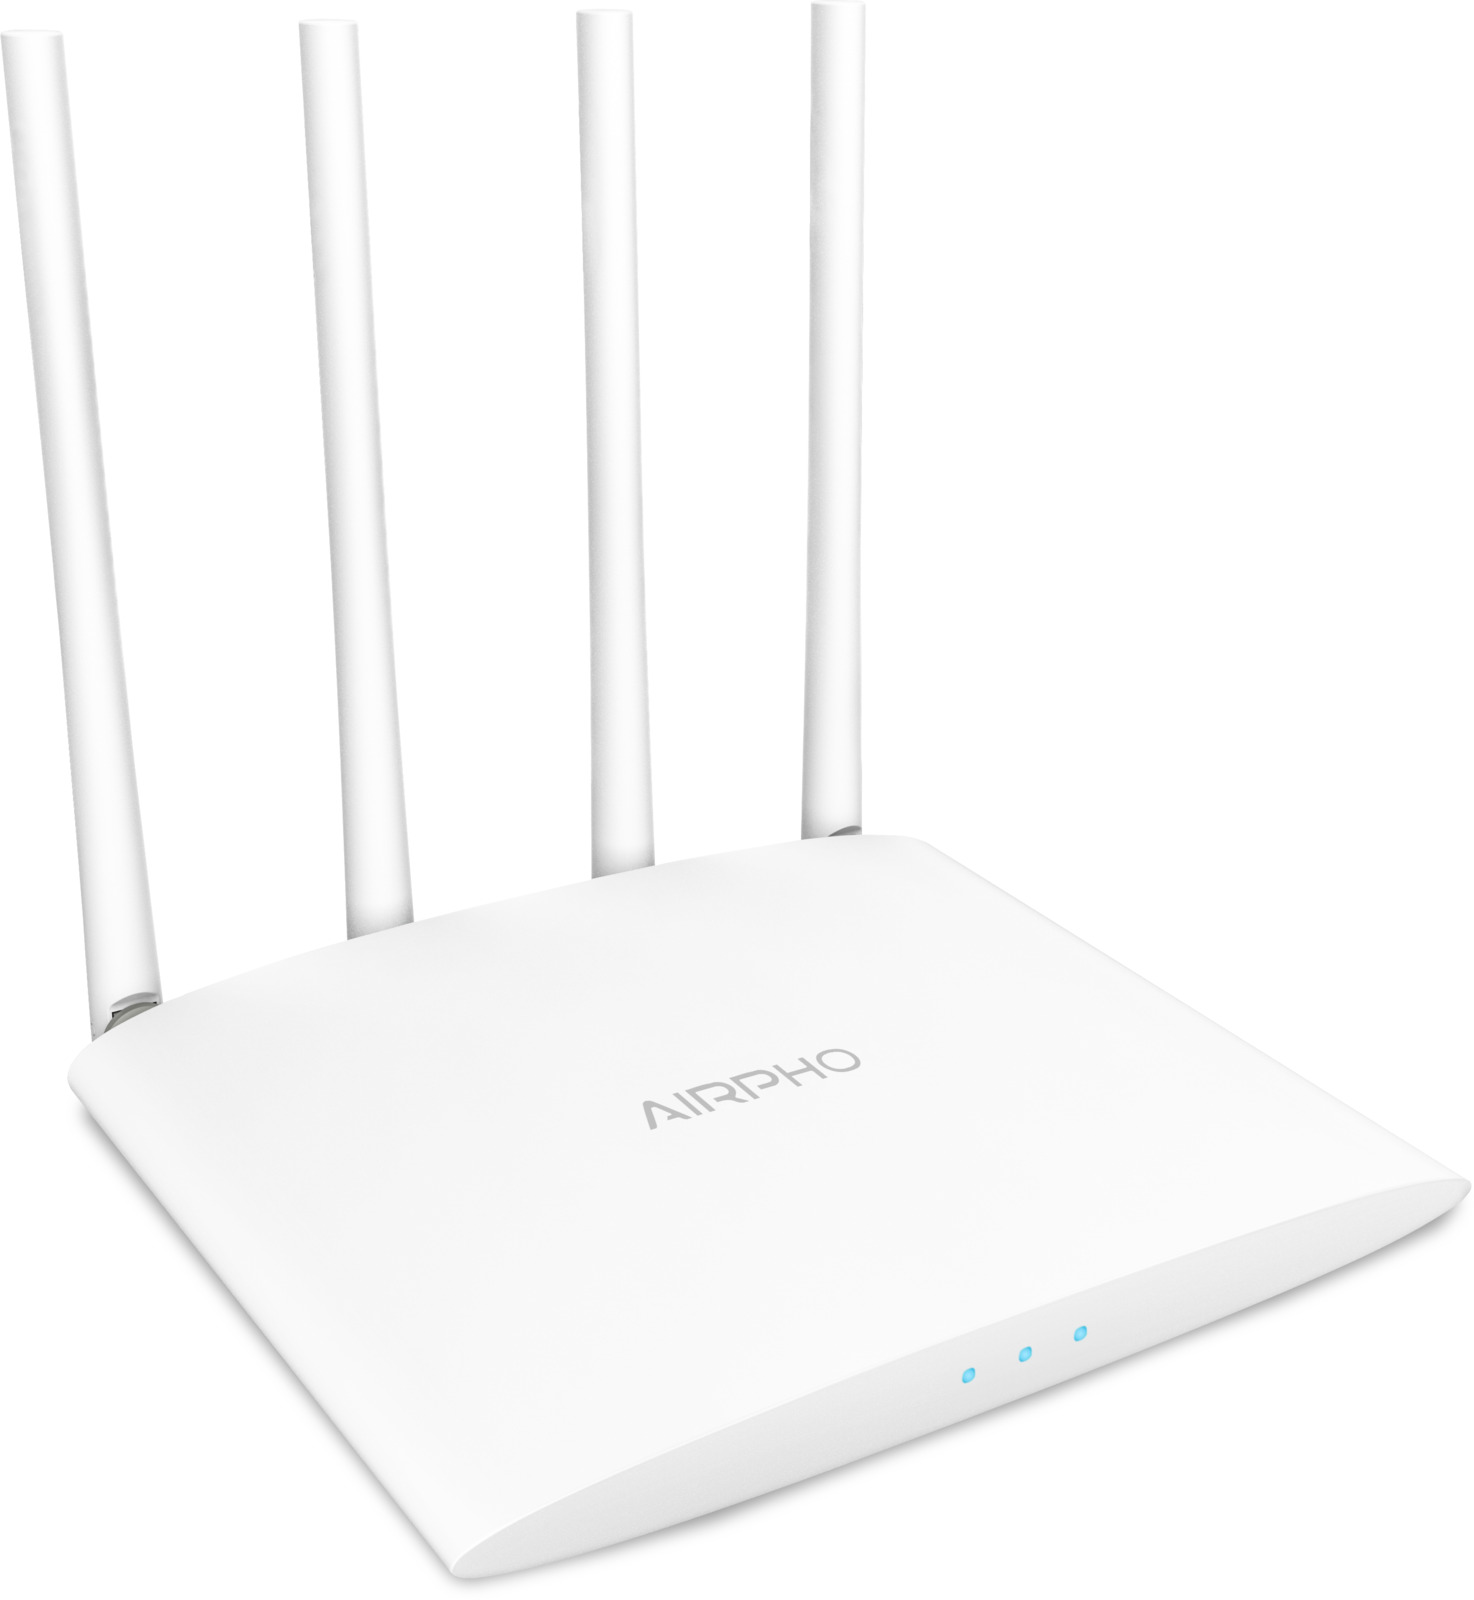 Mbit/s WLAN AR-W400 1200 AIRPHO Router